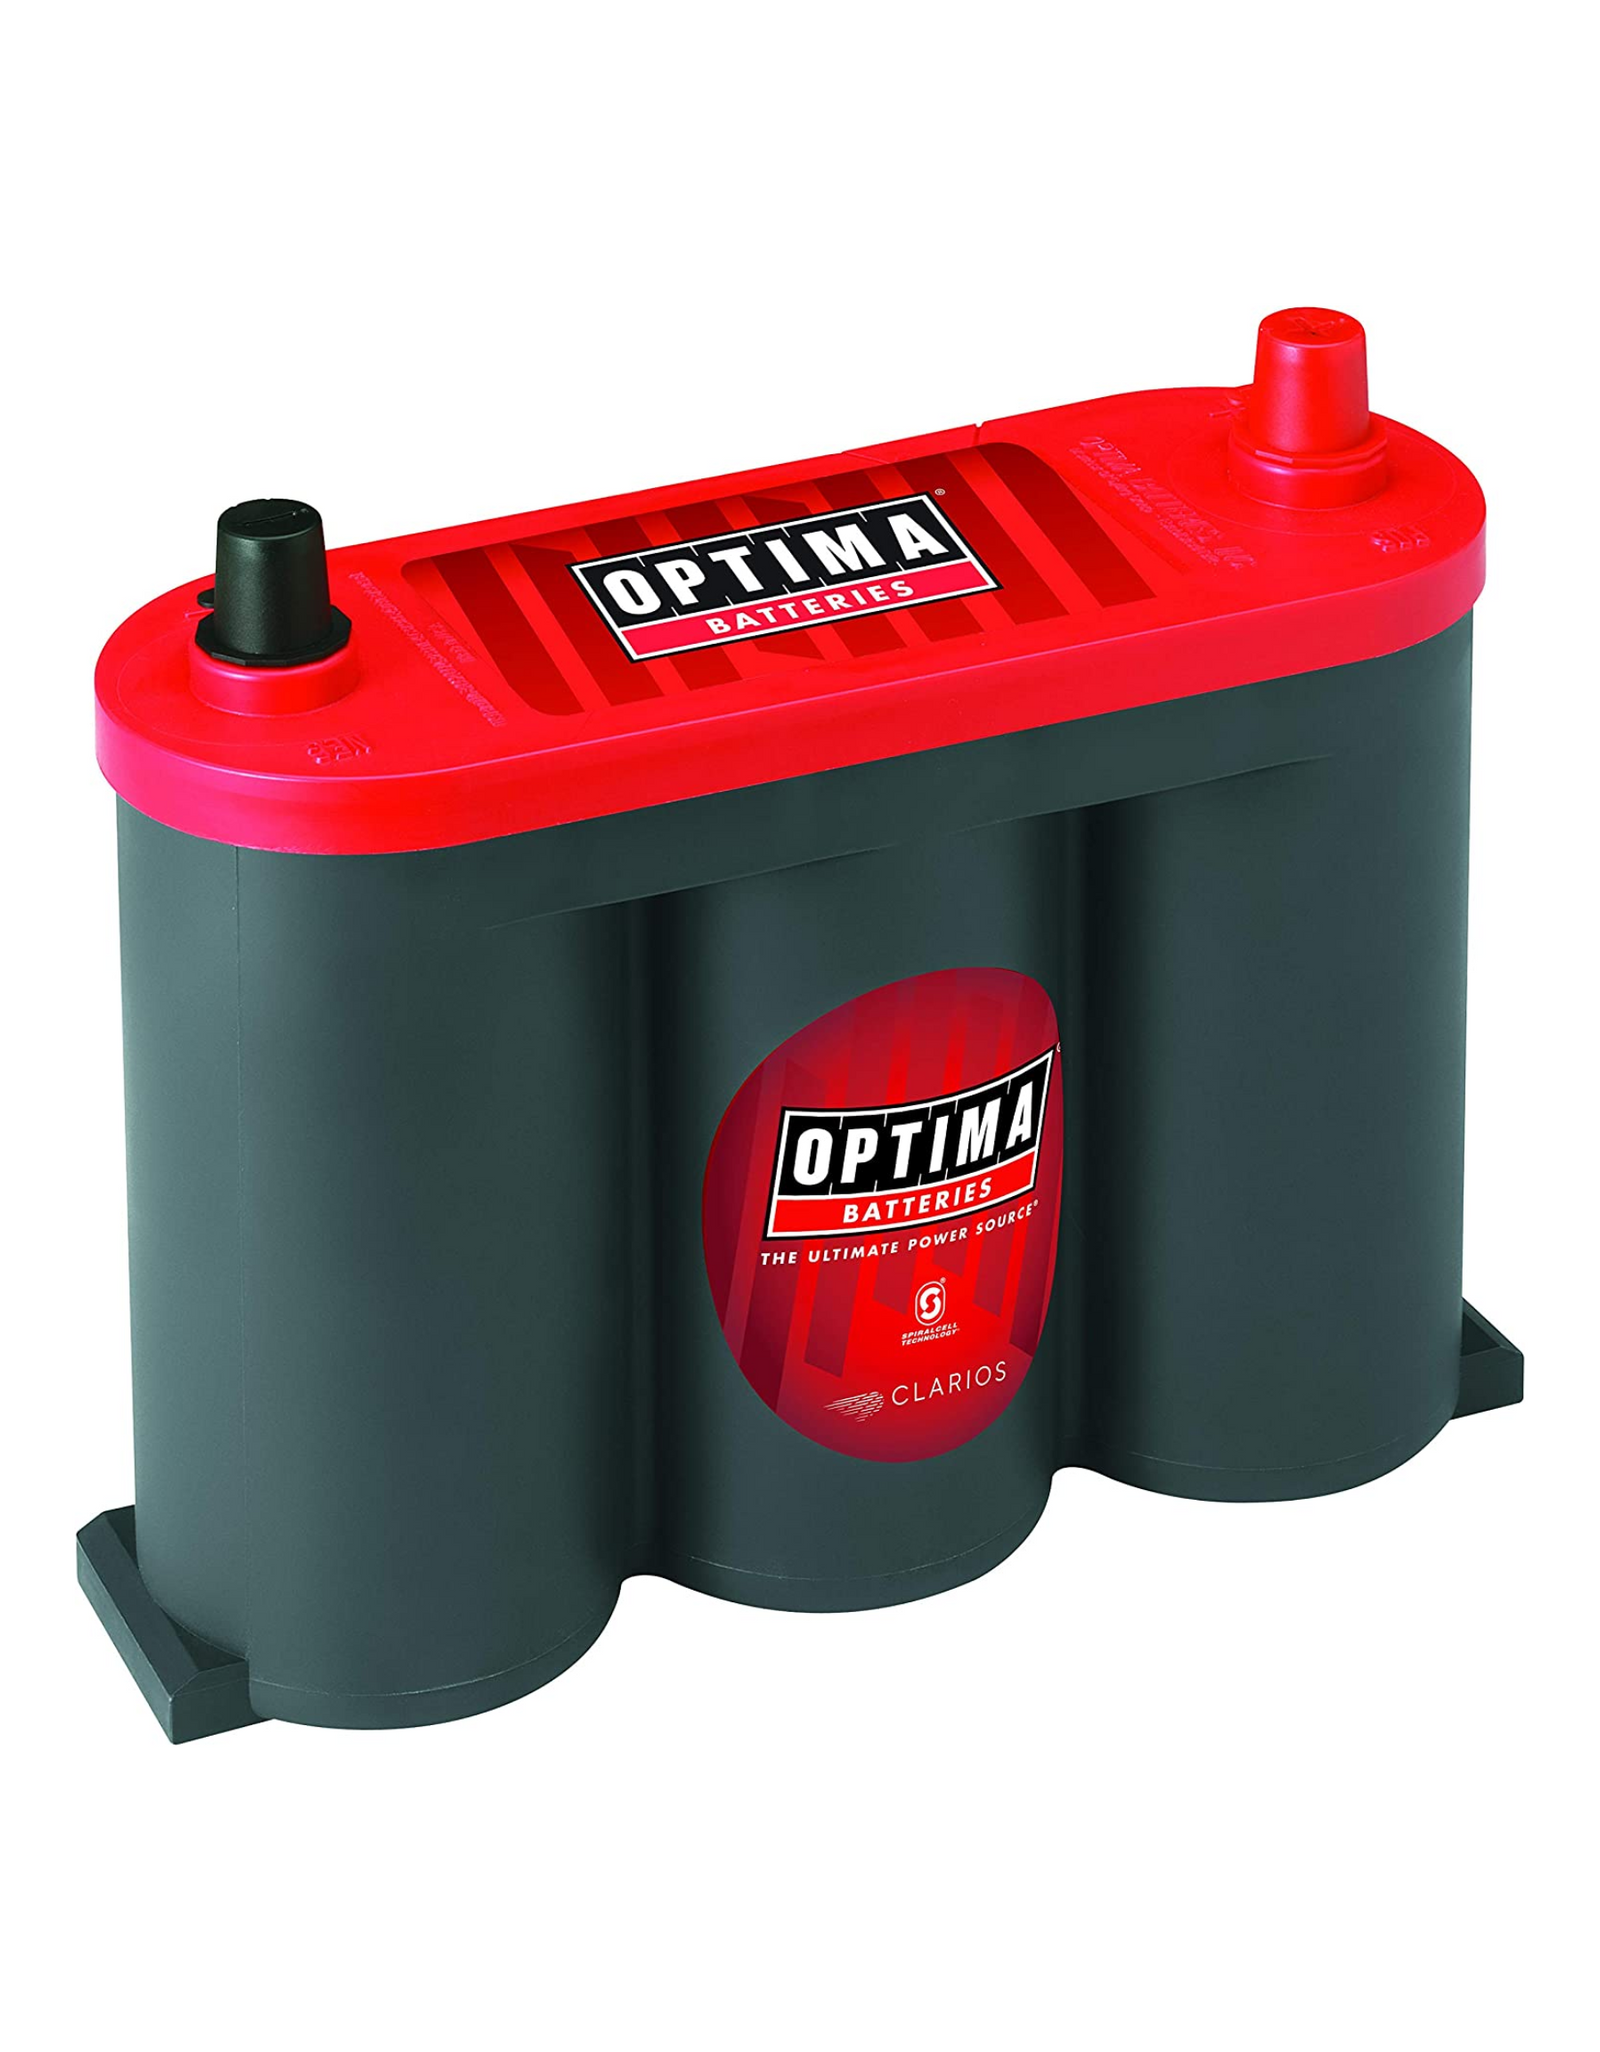 Optima Batteries OPT8010-044, 6-Volt, 800 Cold Cranking Amps, RedTop Starting Battery